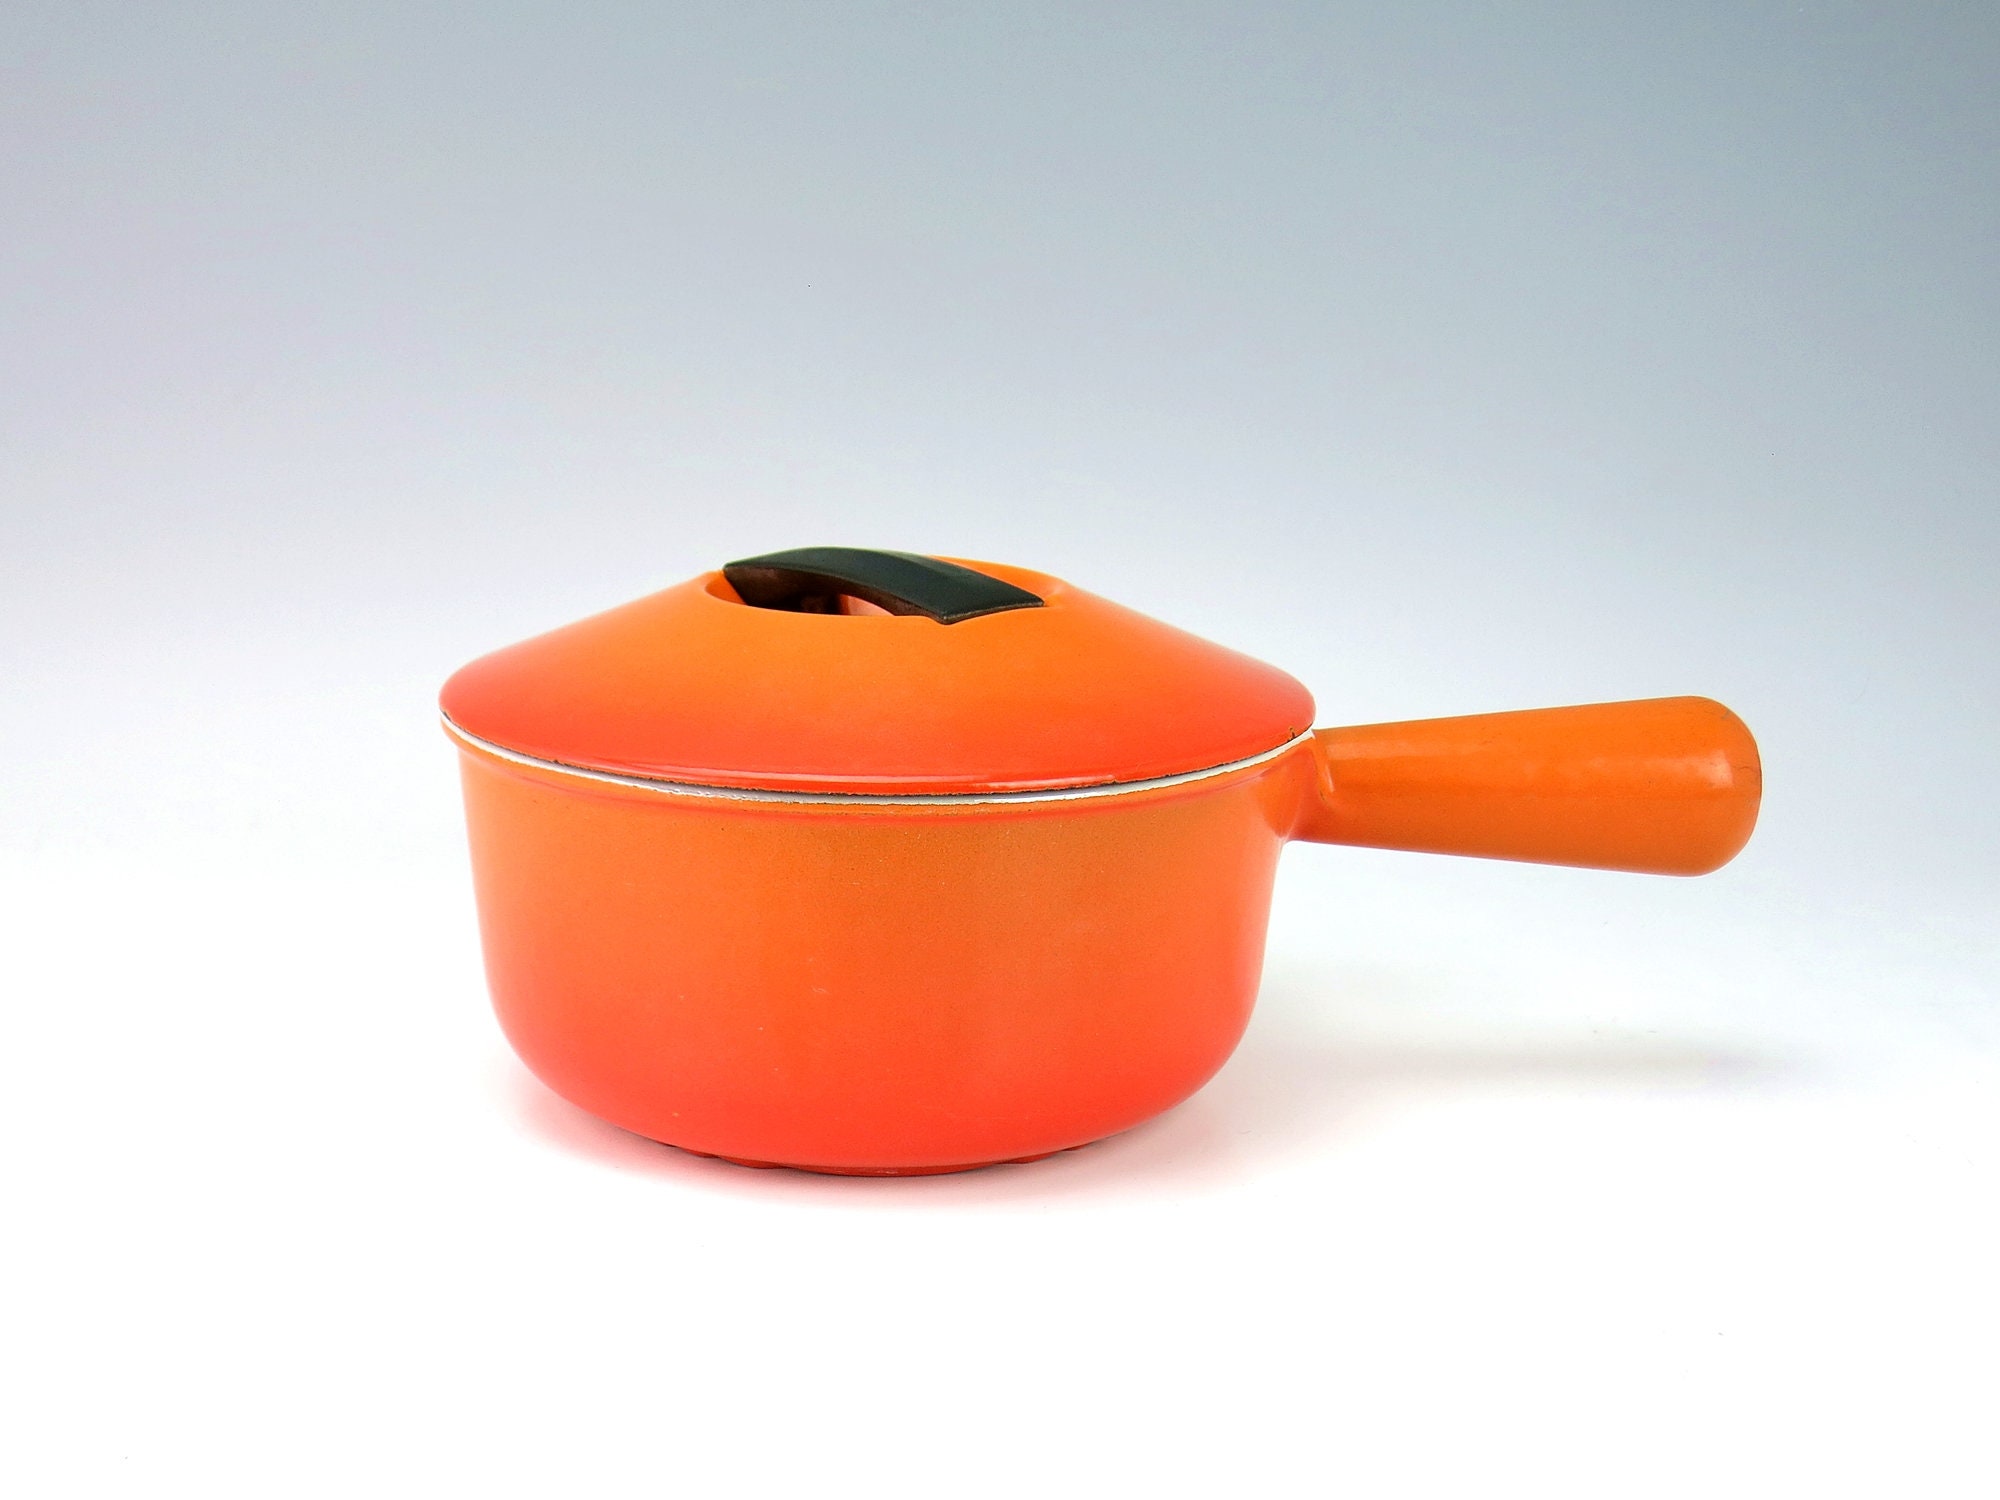 Doufeu Cousances 1553 Cast Iron Dutch Oven, Oval, Very Large Size 20, Flame  Orange Red, Le Creuset, Looped Handles, Made in France -  Finland